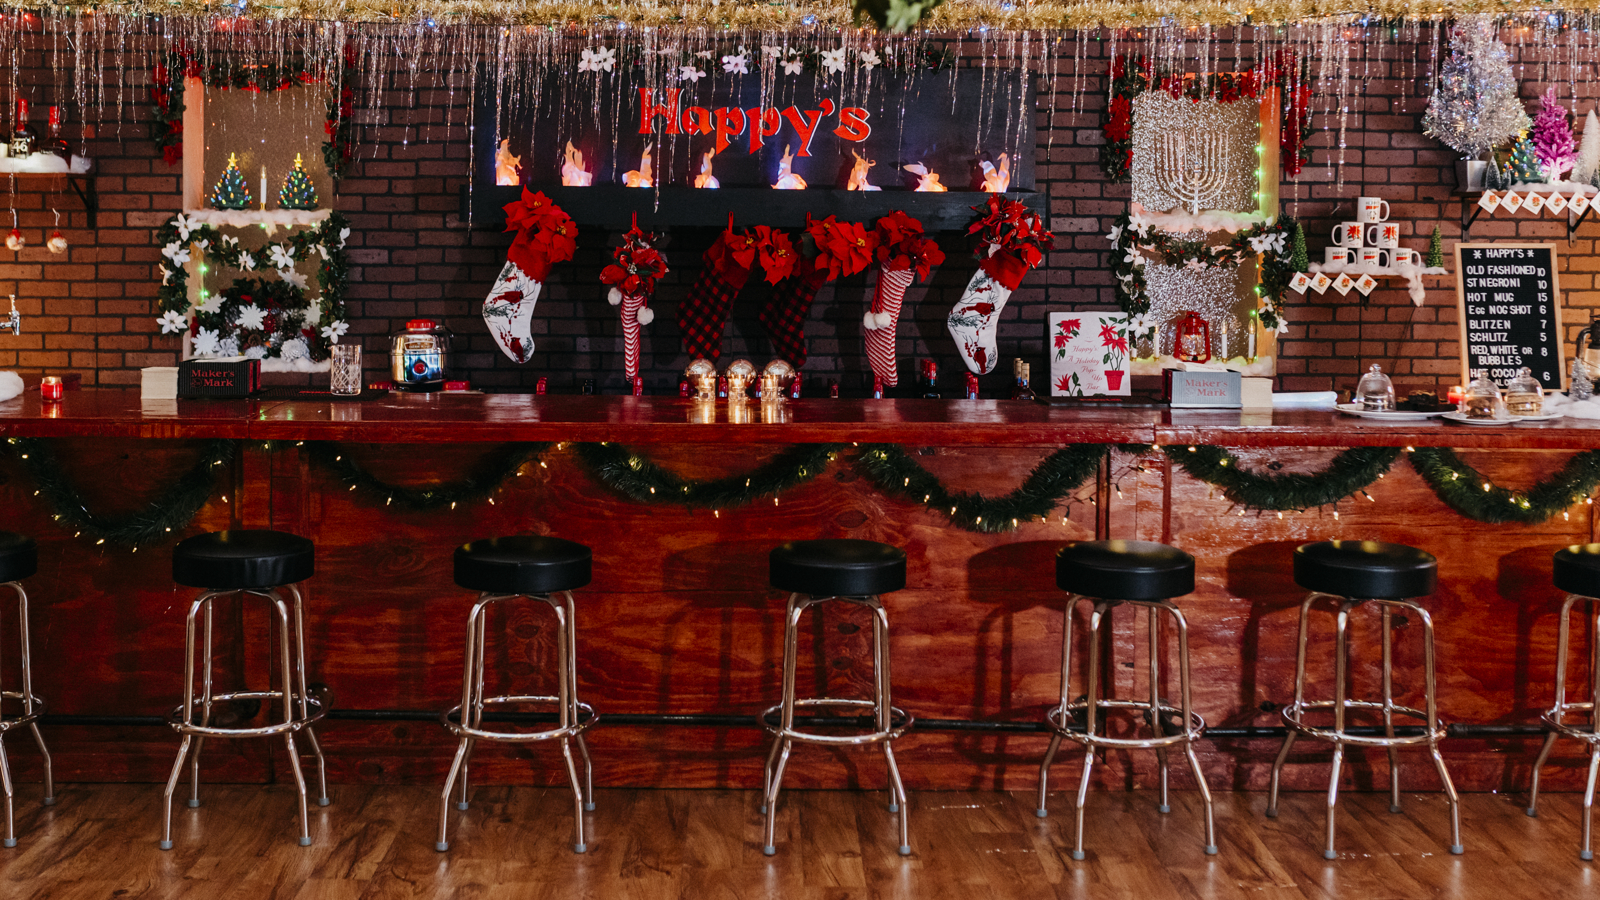 Happy's: A Holiday Pop-Up Bar 